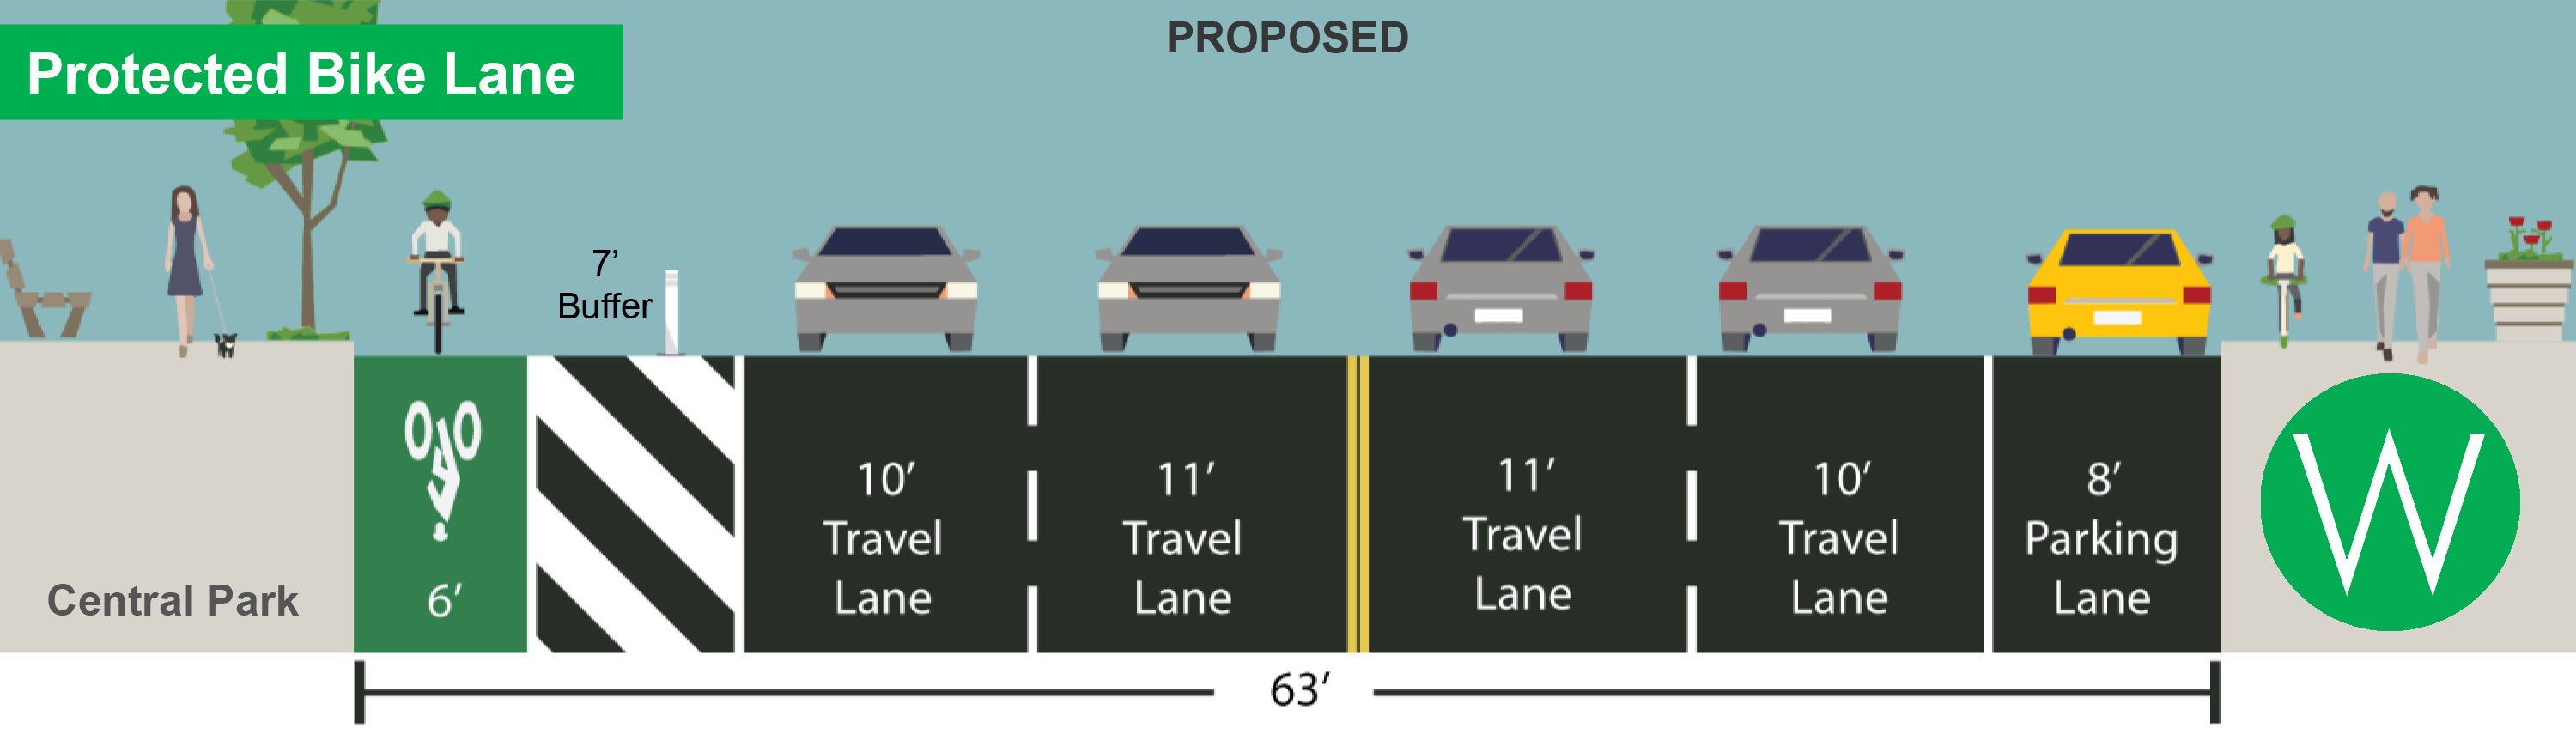 UPDATED: CPW Bike Lane Up for Vote